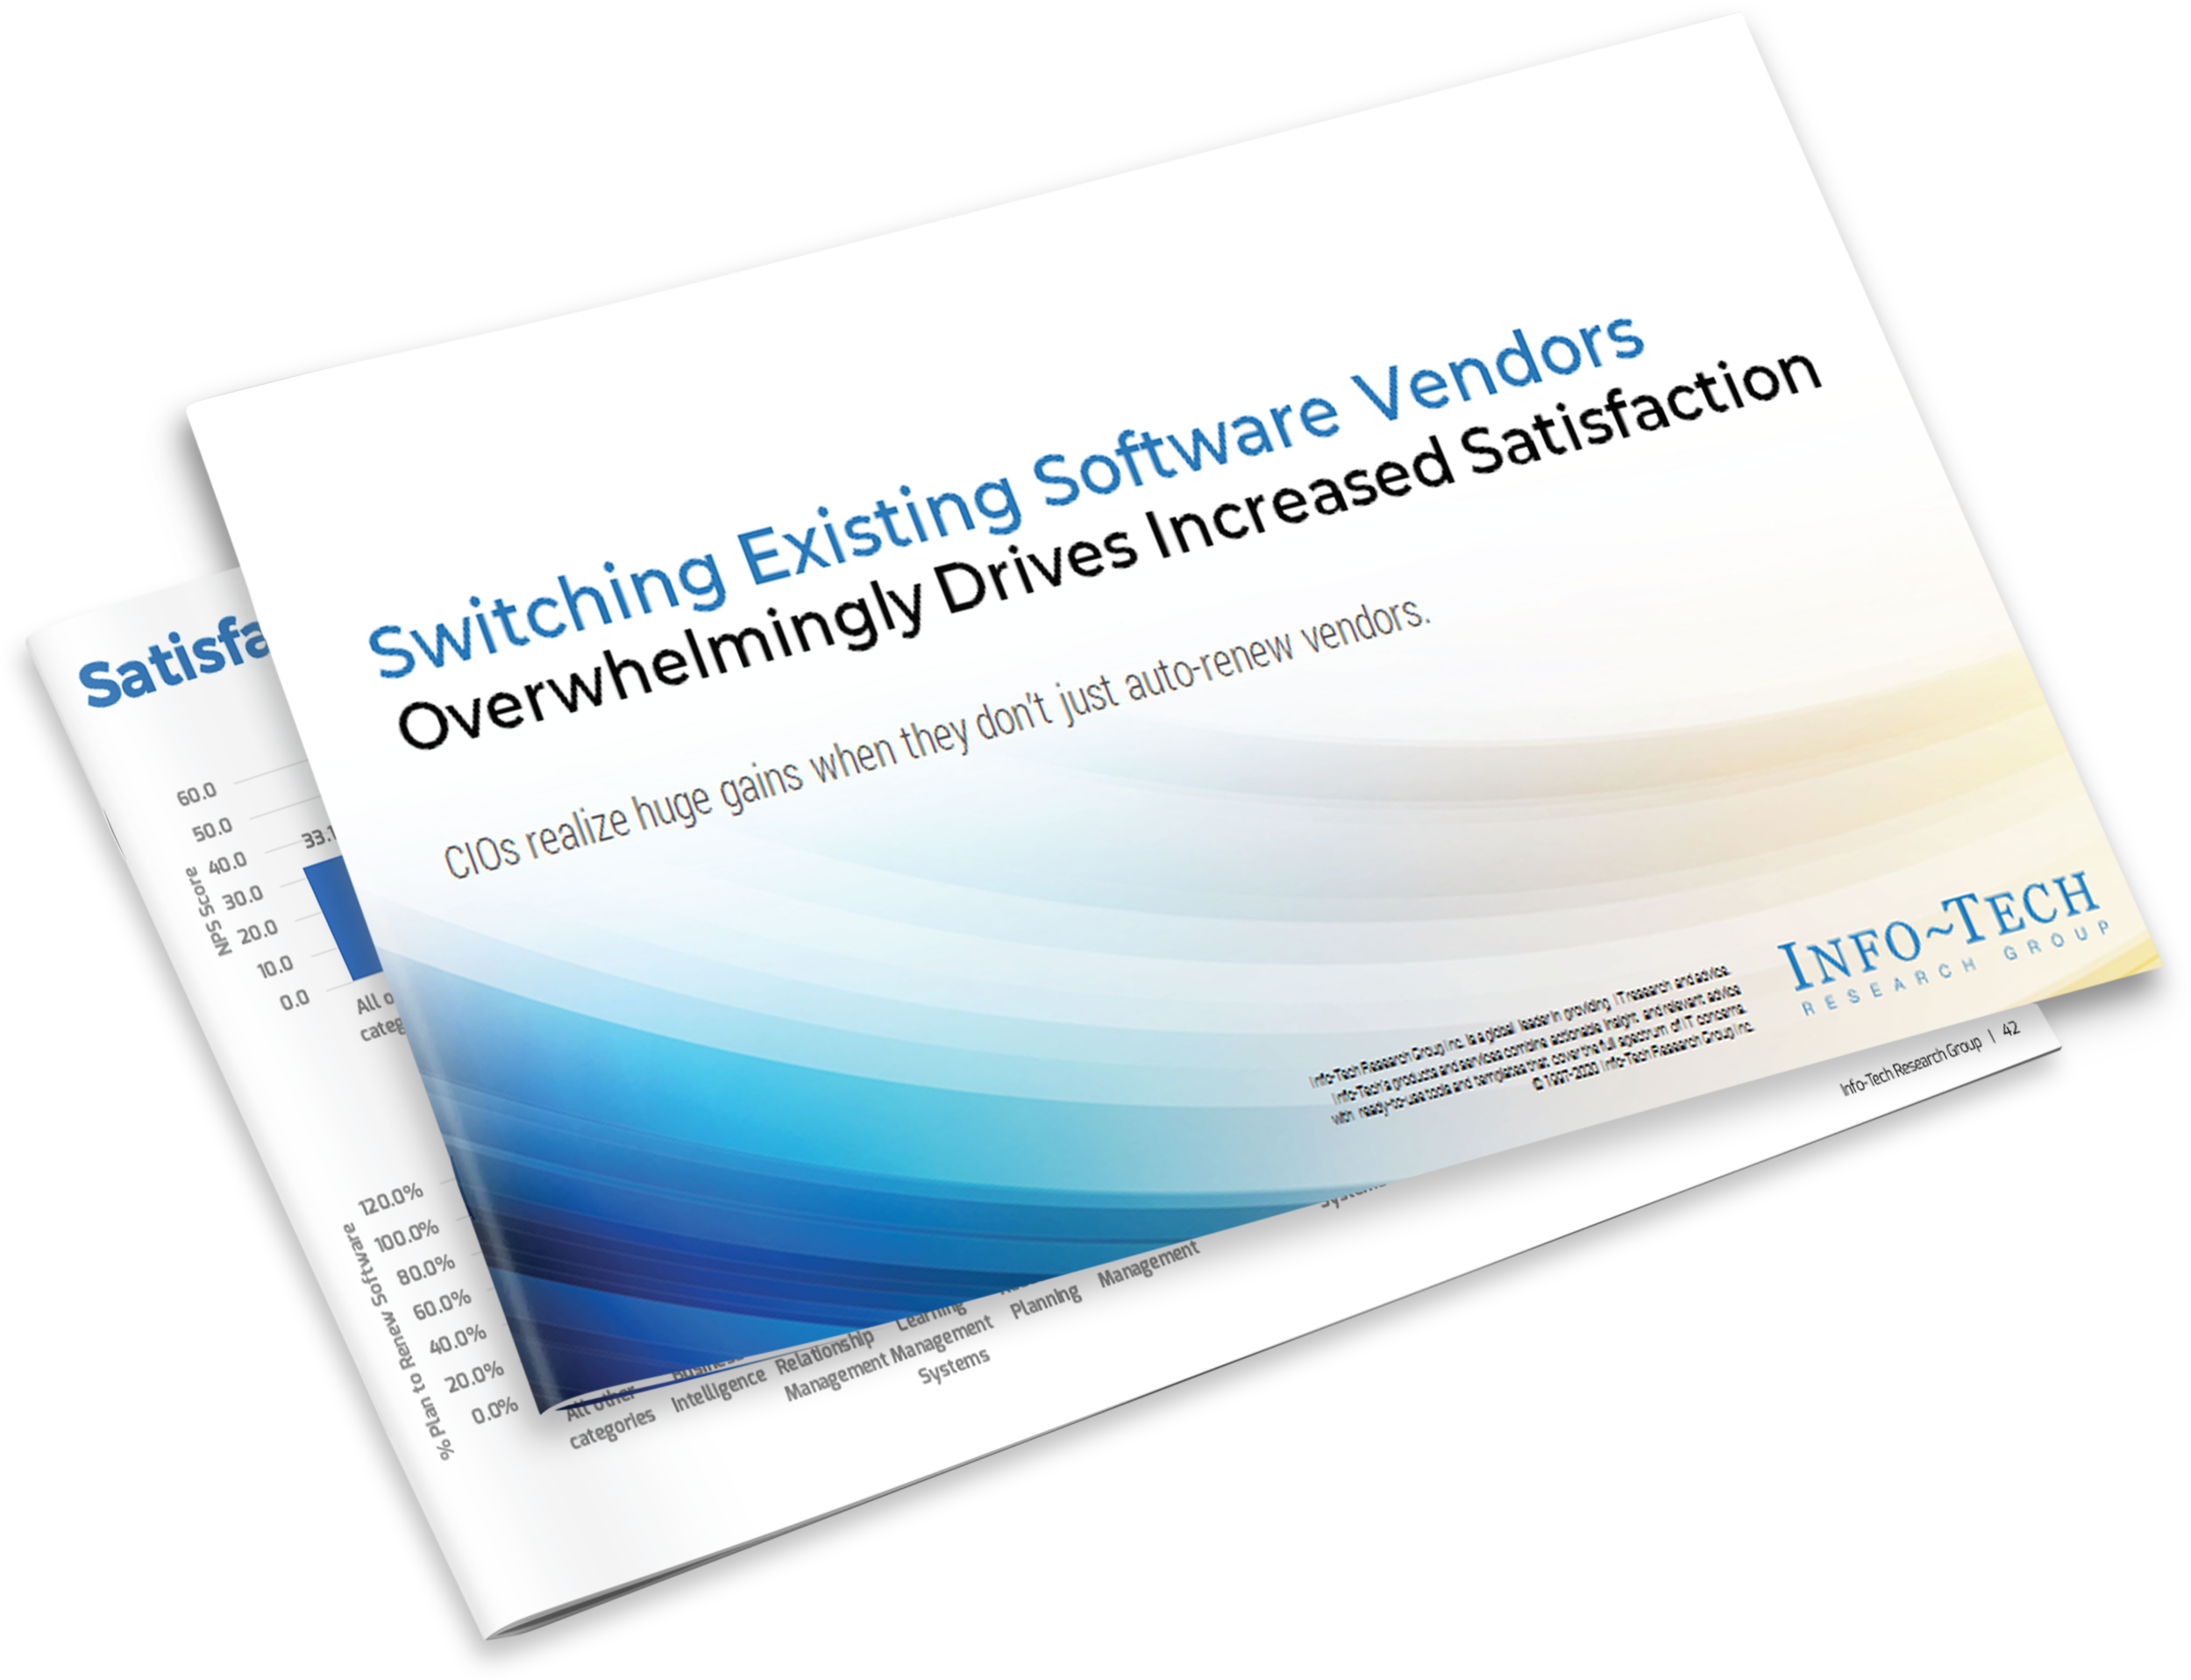 Download the Switching Existing Software Vendors Blueprint